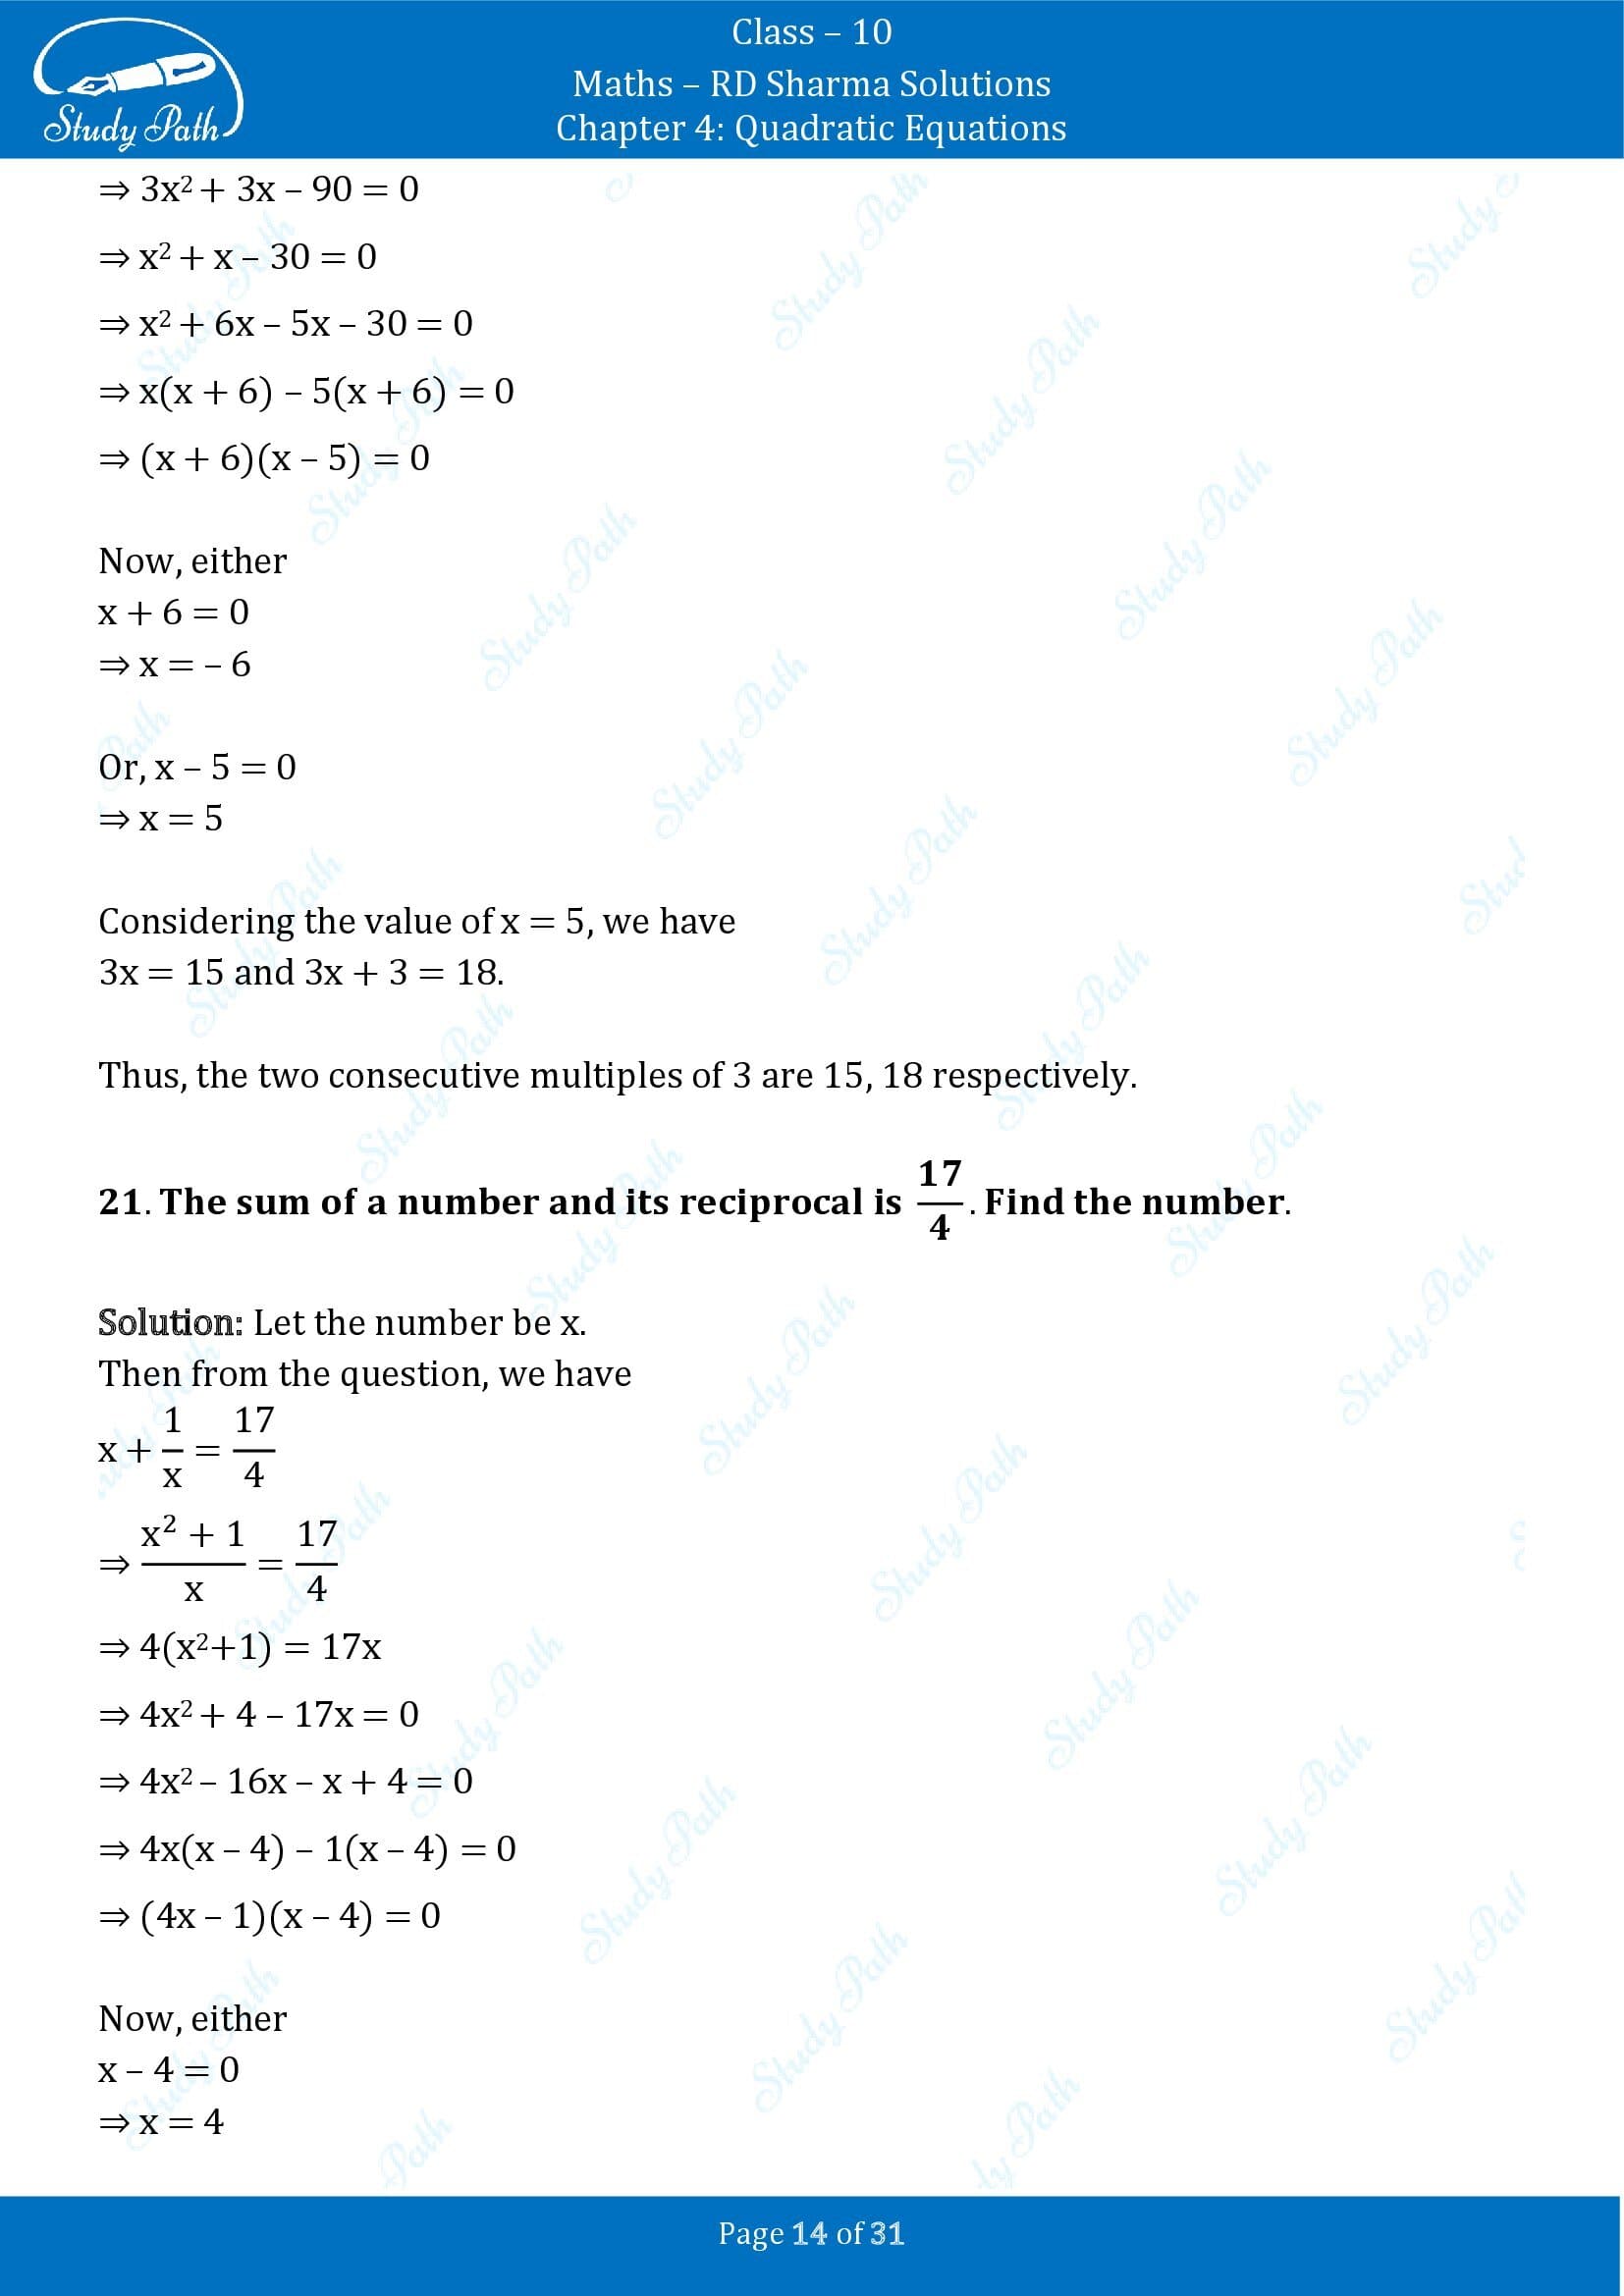 RD Sharma Solutions Class 10 Chapter 4 Quadratic Equations Exercise 4.7 00014